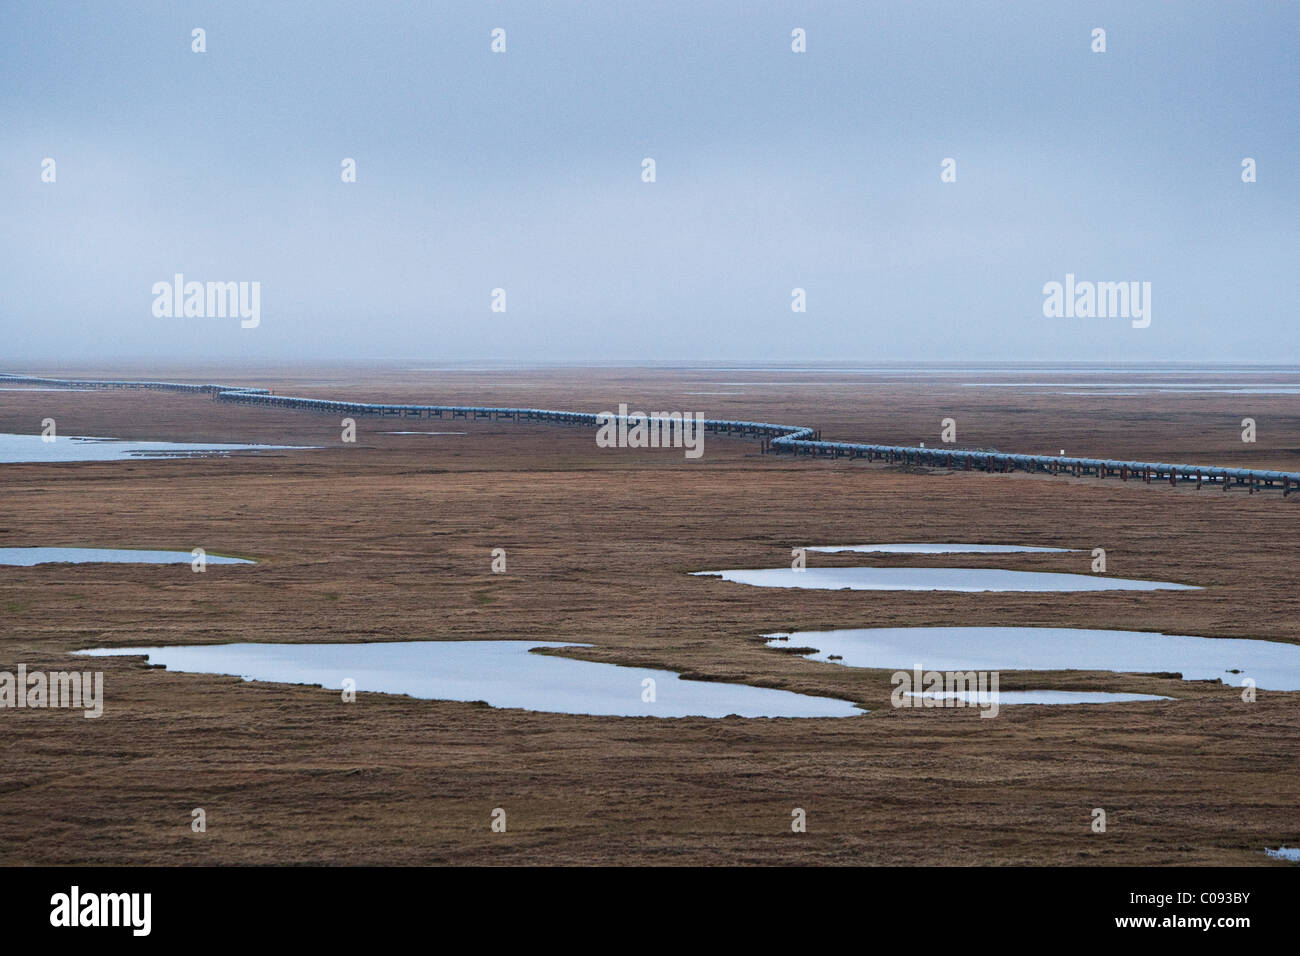 Aerial view of the Trans-Alaska Pipeline crossing the tundra of the coastal plain, Prudhoe Bay, Arctic Alaska, Summer Stock Photo